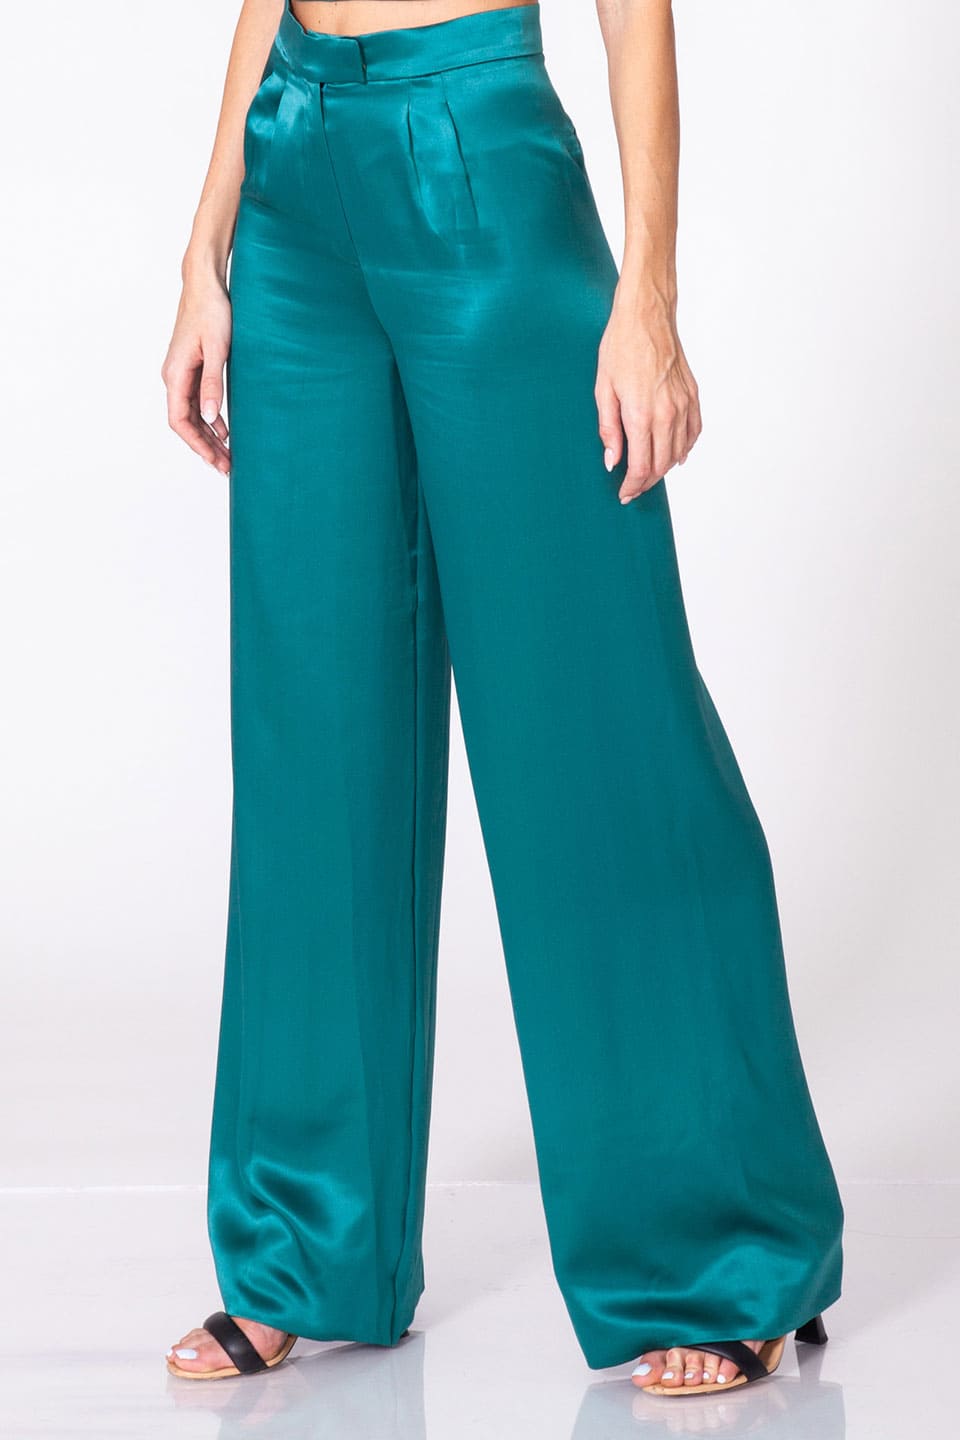 Buy Willow Trousers For Women. Product gallery 1